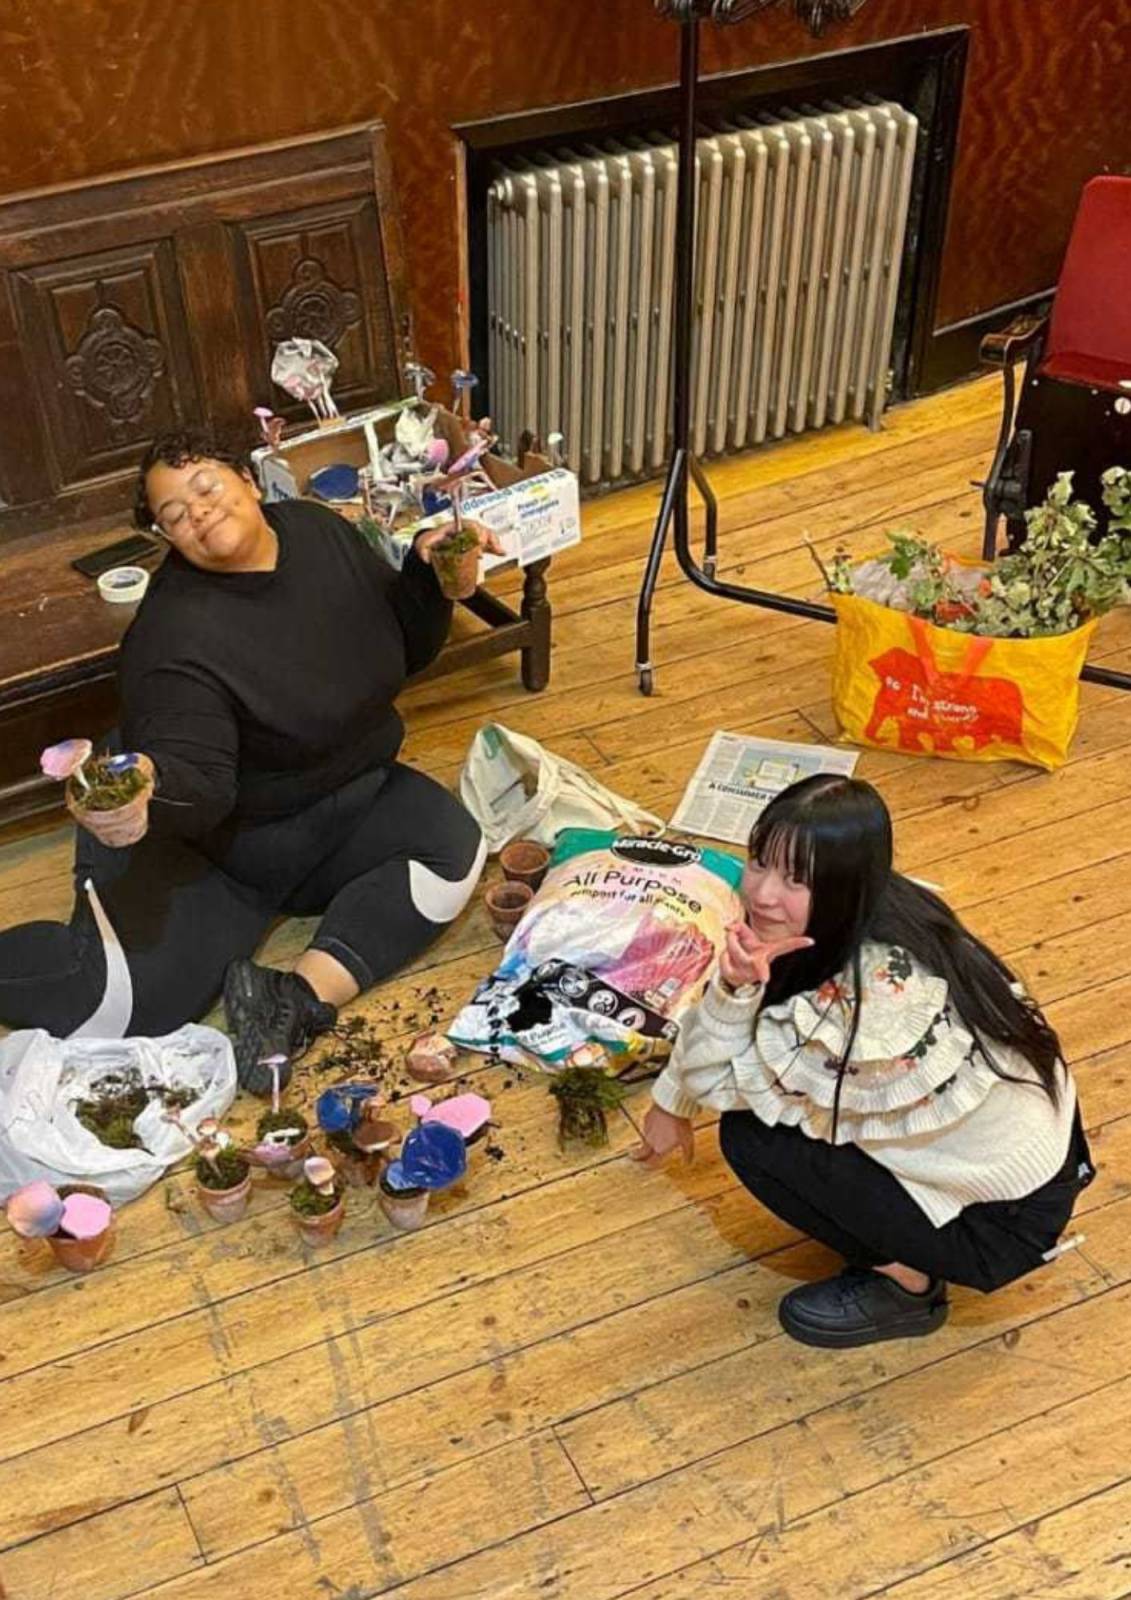 Two young people - Nene and Zoey, sit or crouch on a wooden floor in the middle of a crafts session at Toynbee Studios. They are both smiling for the camera, whilst they make mushroom sculptures out of newspapers.